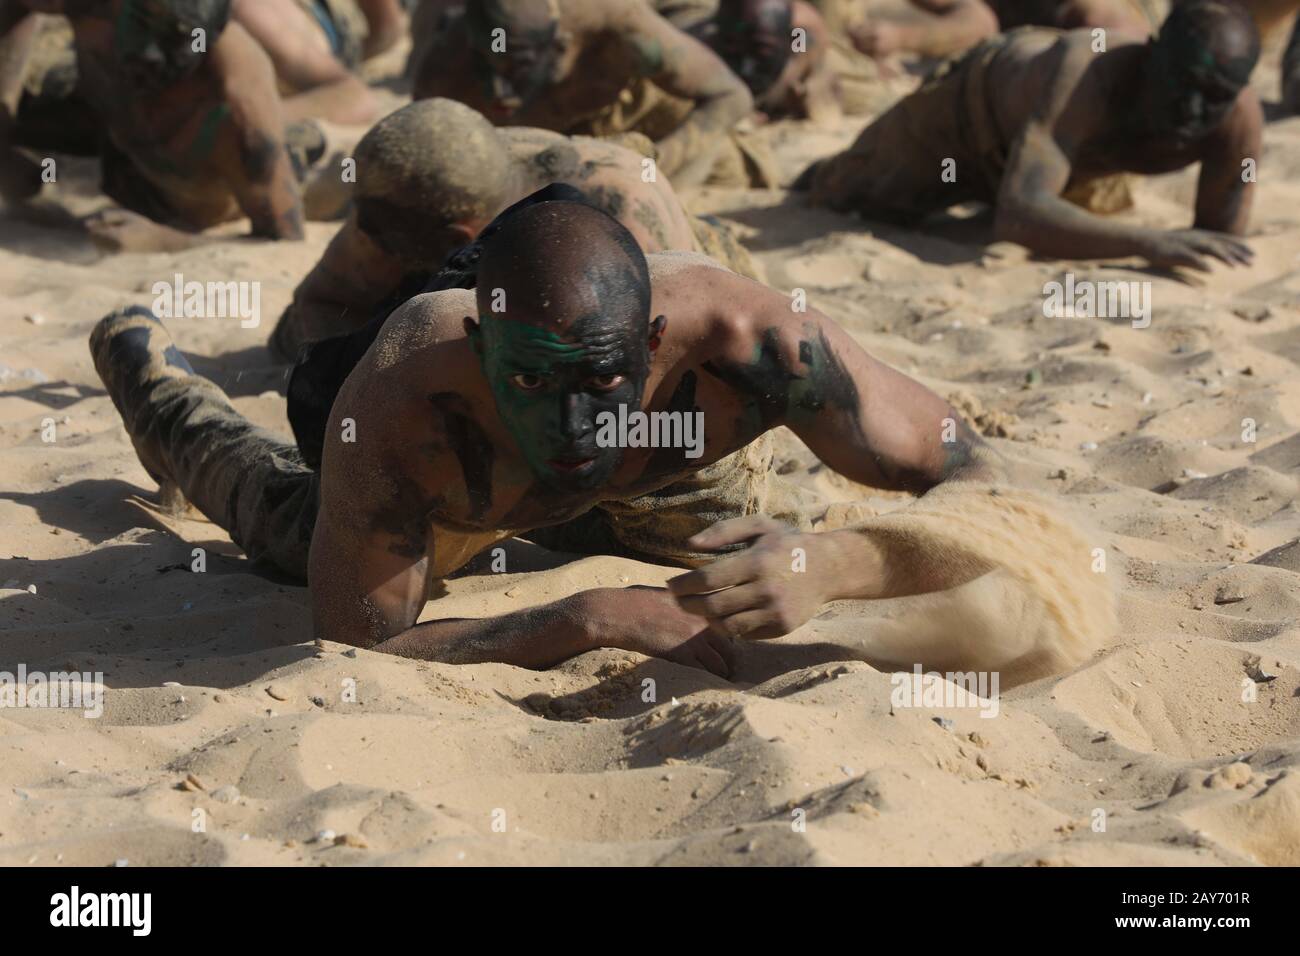 Palestinian police cadets take part in a training session at a police academy in Gaza City, on February 6, 2020. Photo by Abed Rahim Khatib/Alamy Stock Photo